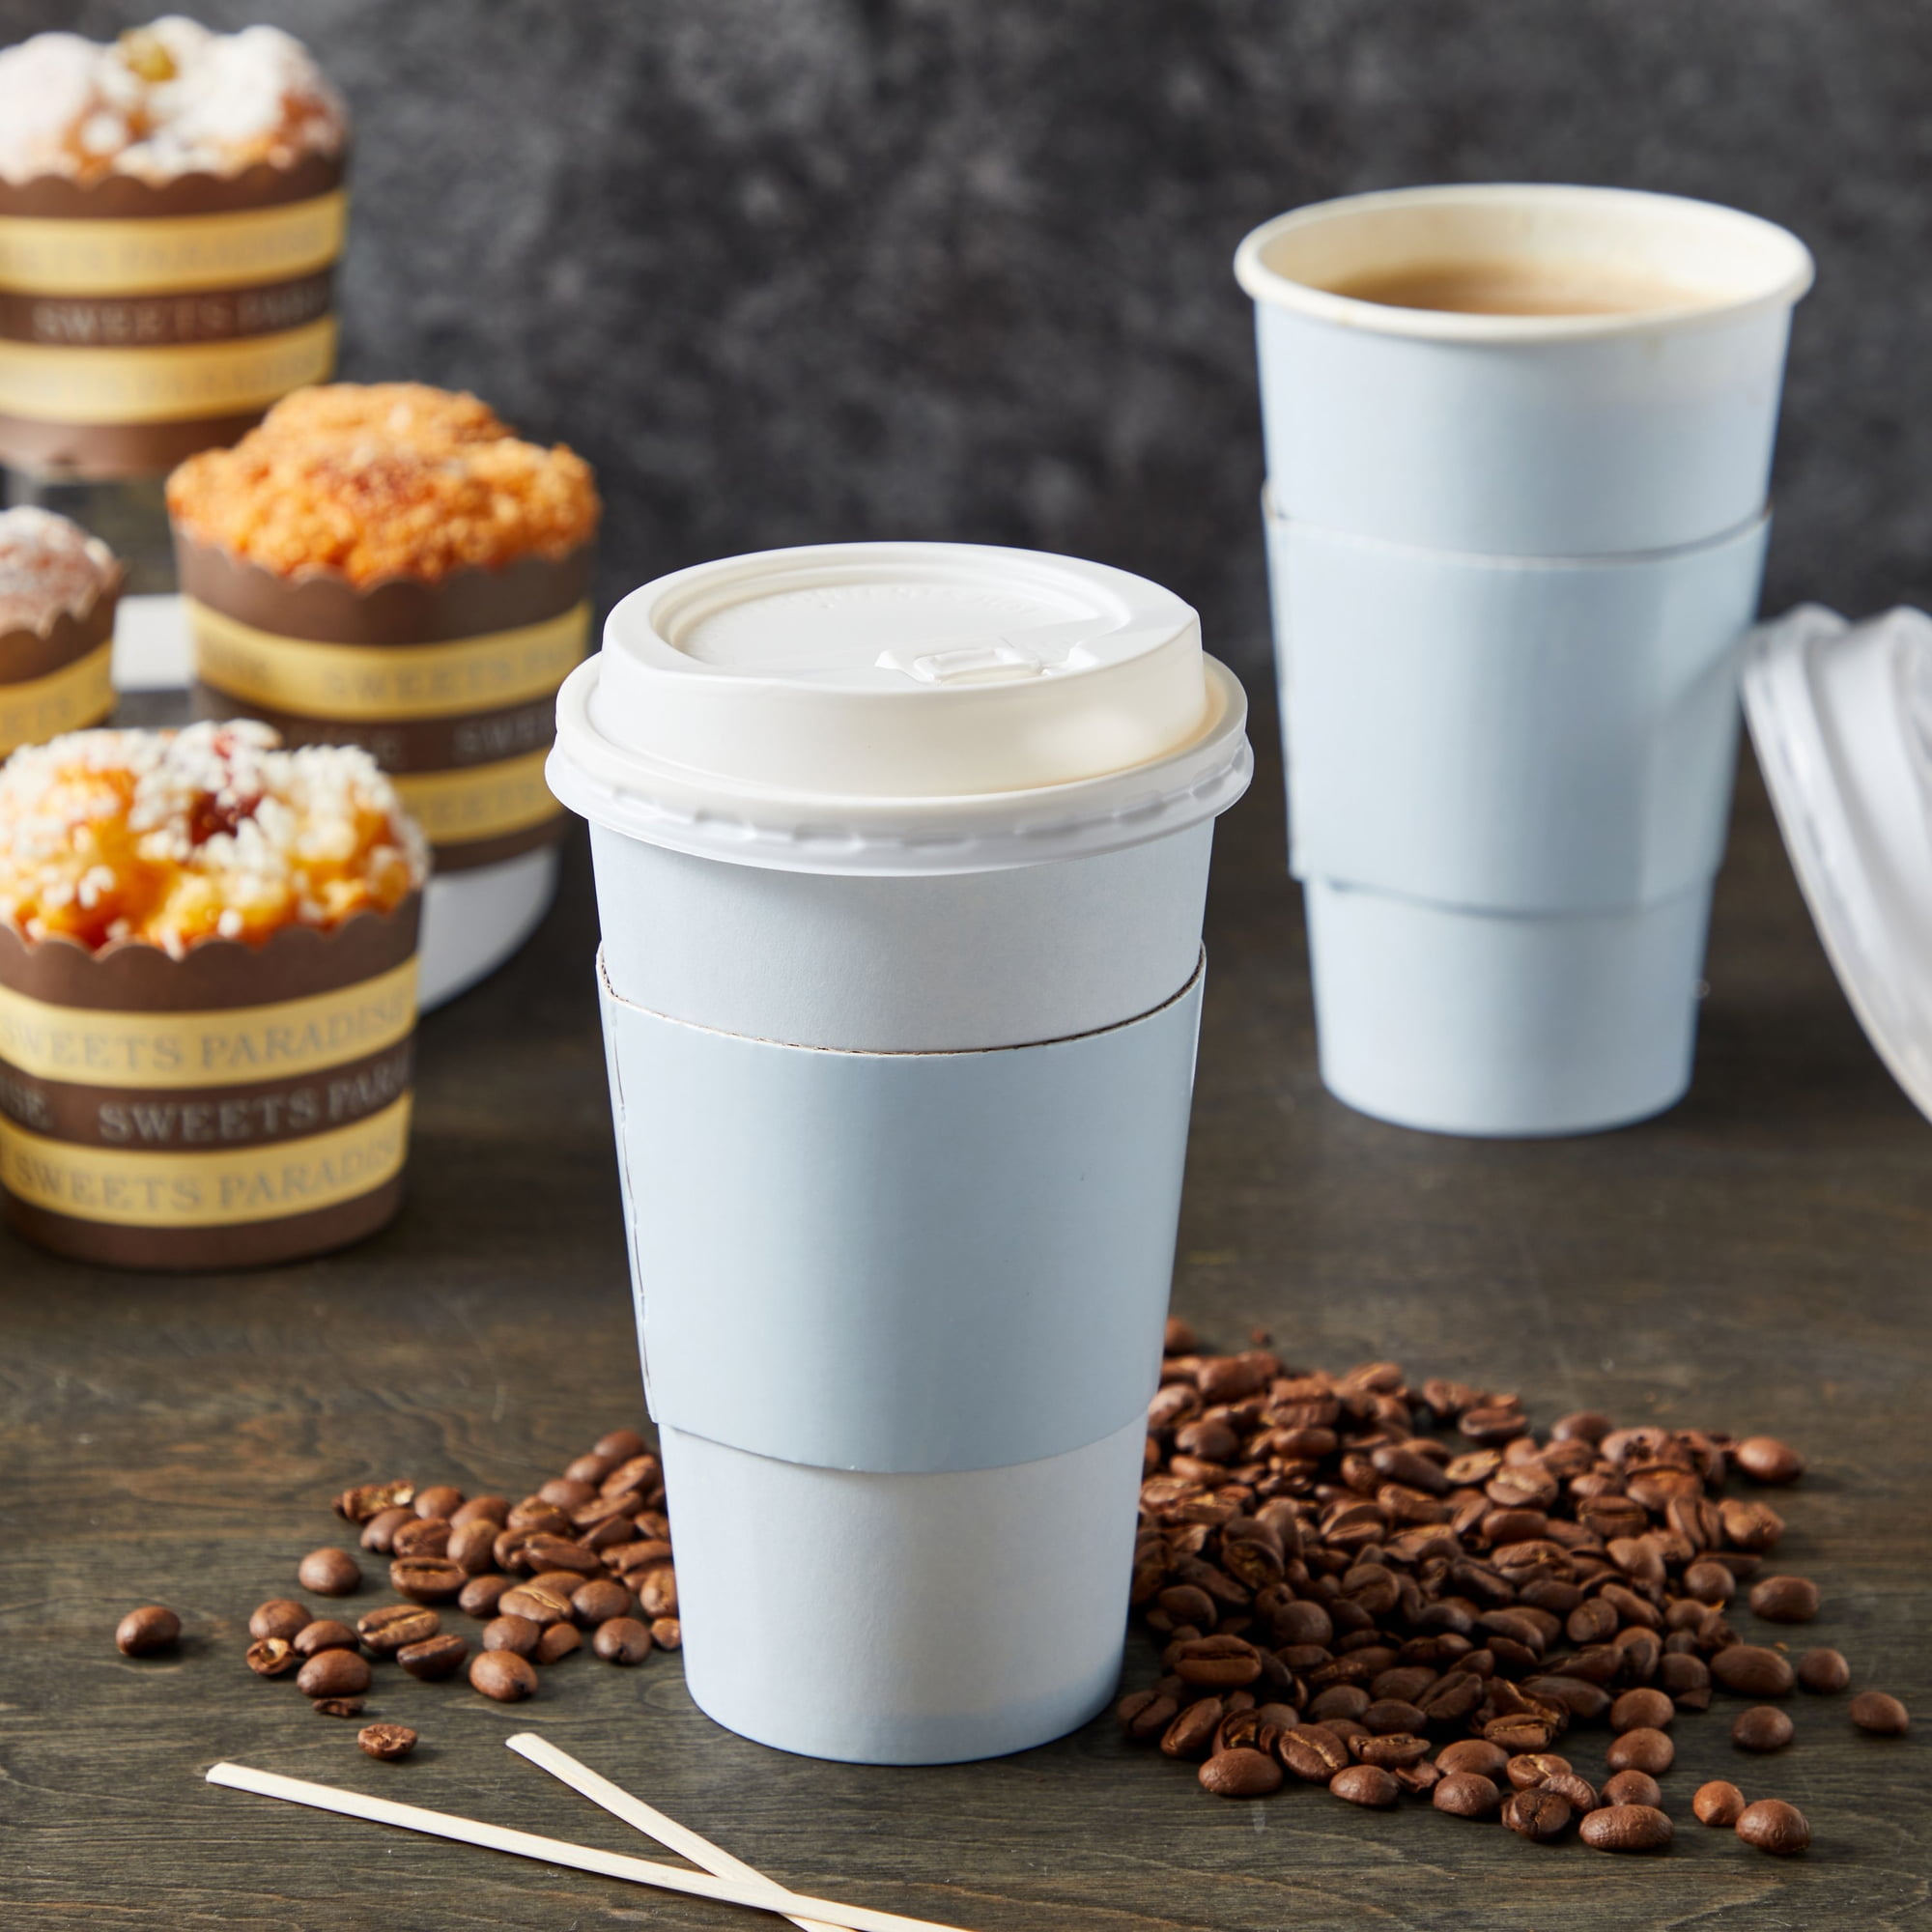 48x Disposable Coffee Cups with Lids and Sleeves Bulk for Hot To